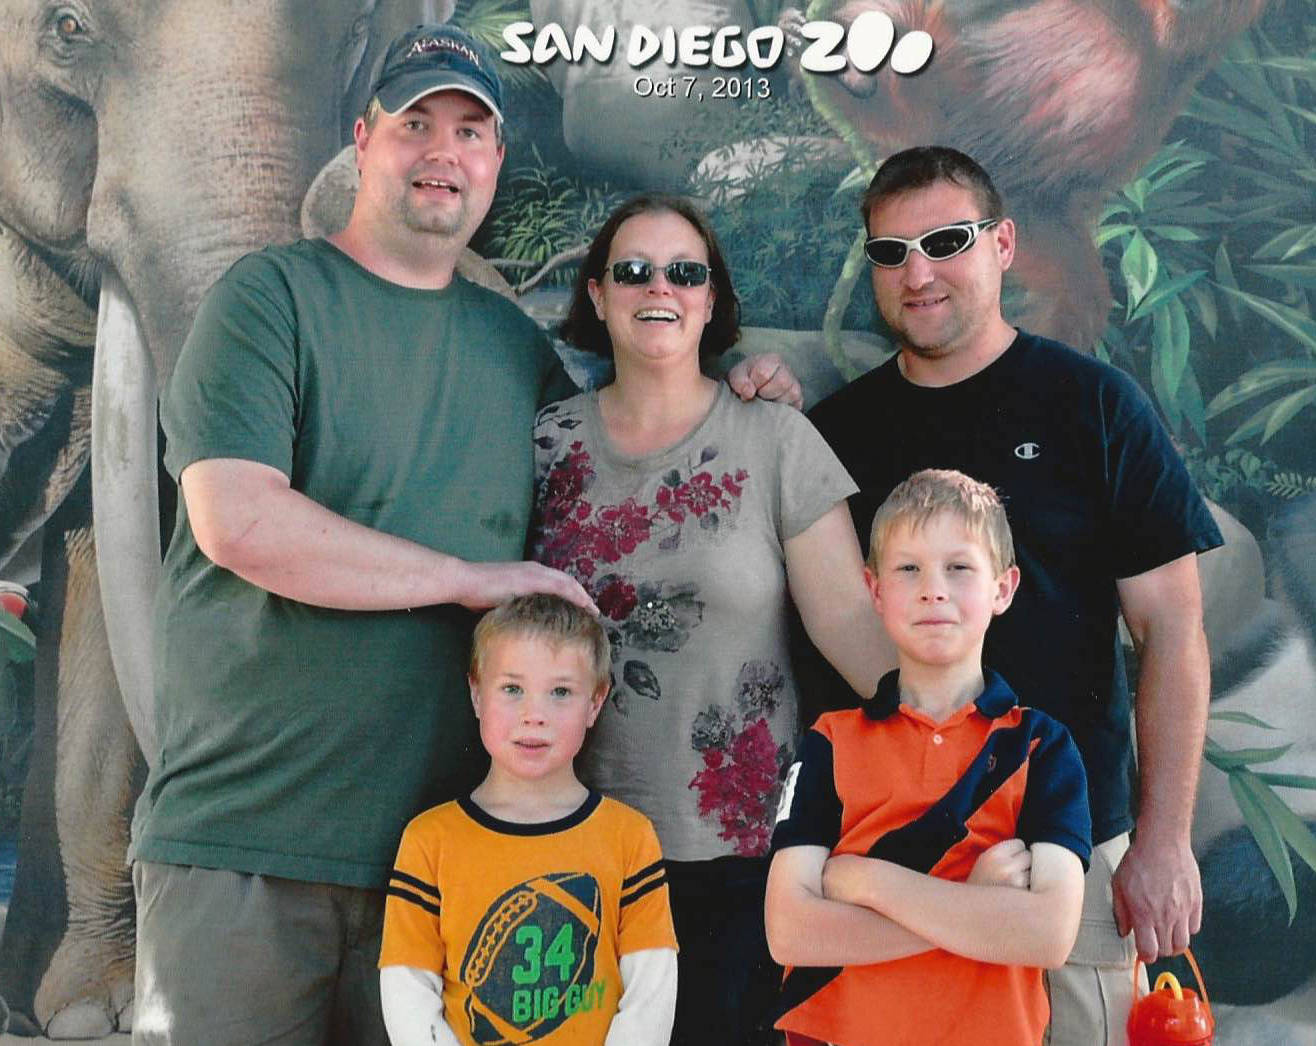 The Arndt family (Karragh, Travis, Kol and Kallum) is seen in a 2013 trip to San Diego along with Karragh Arndt’s brother, Rykken Young. (Photo courtesy of the Arndt family)